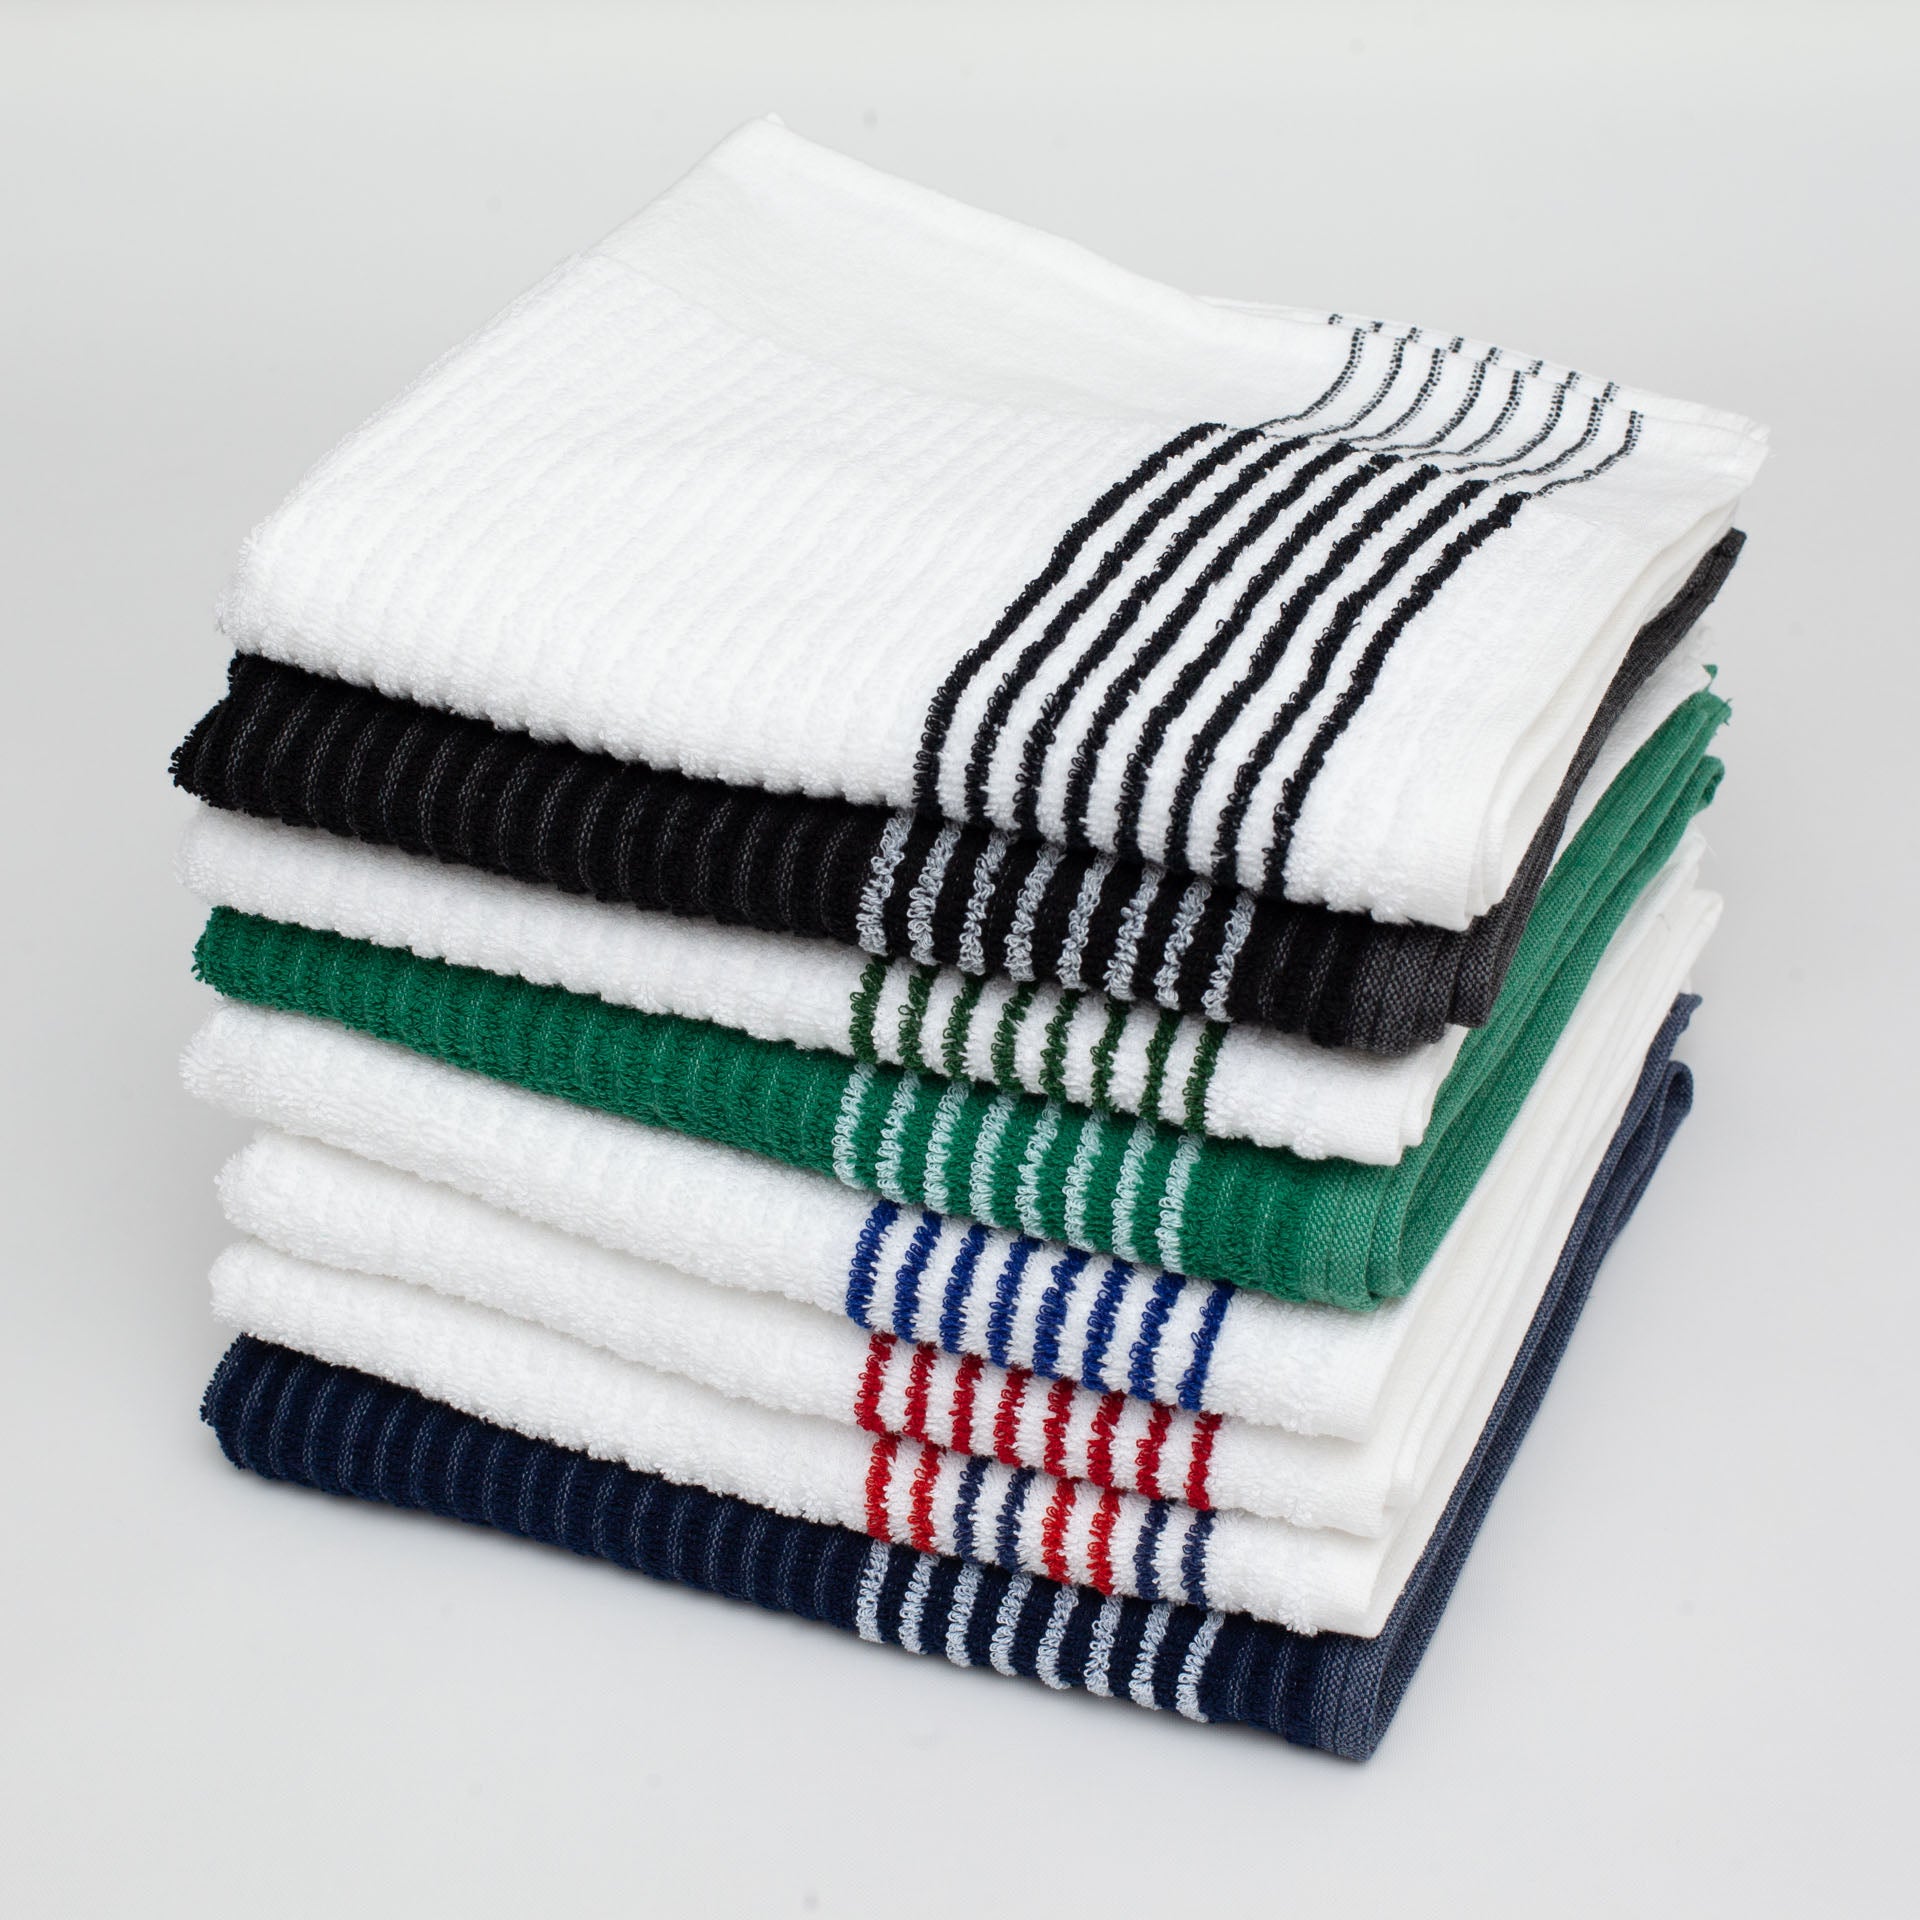 stack of golf caddy towels from cayce golf